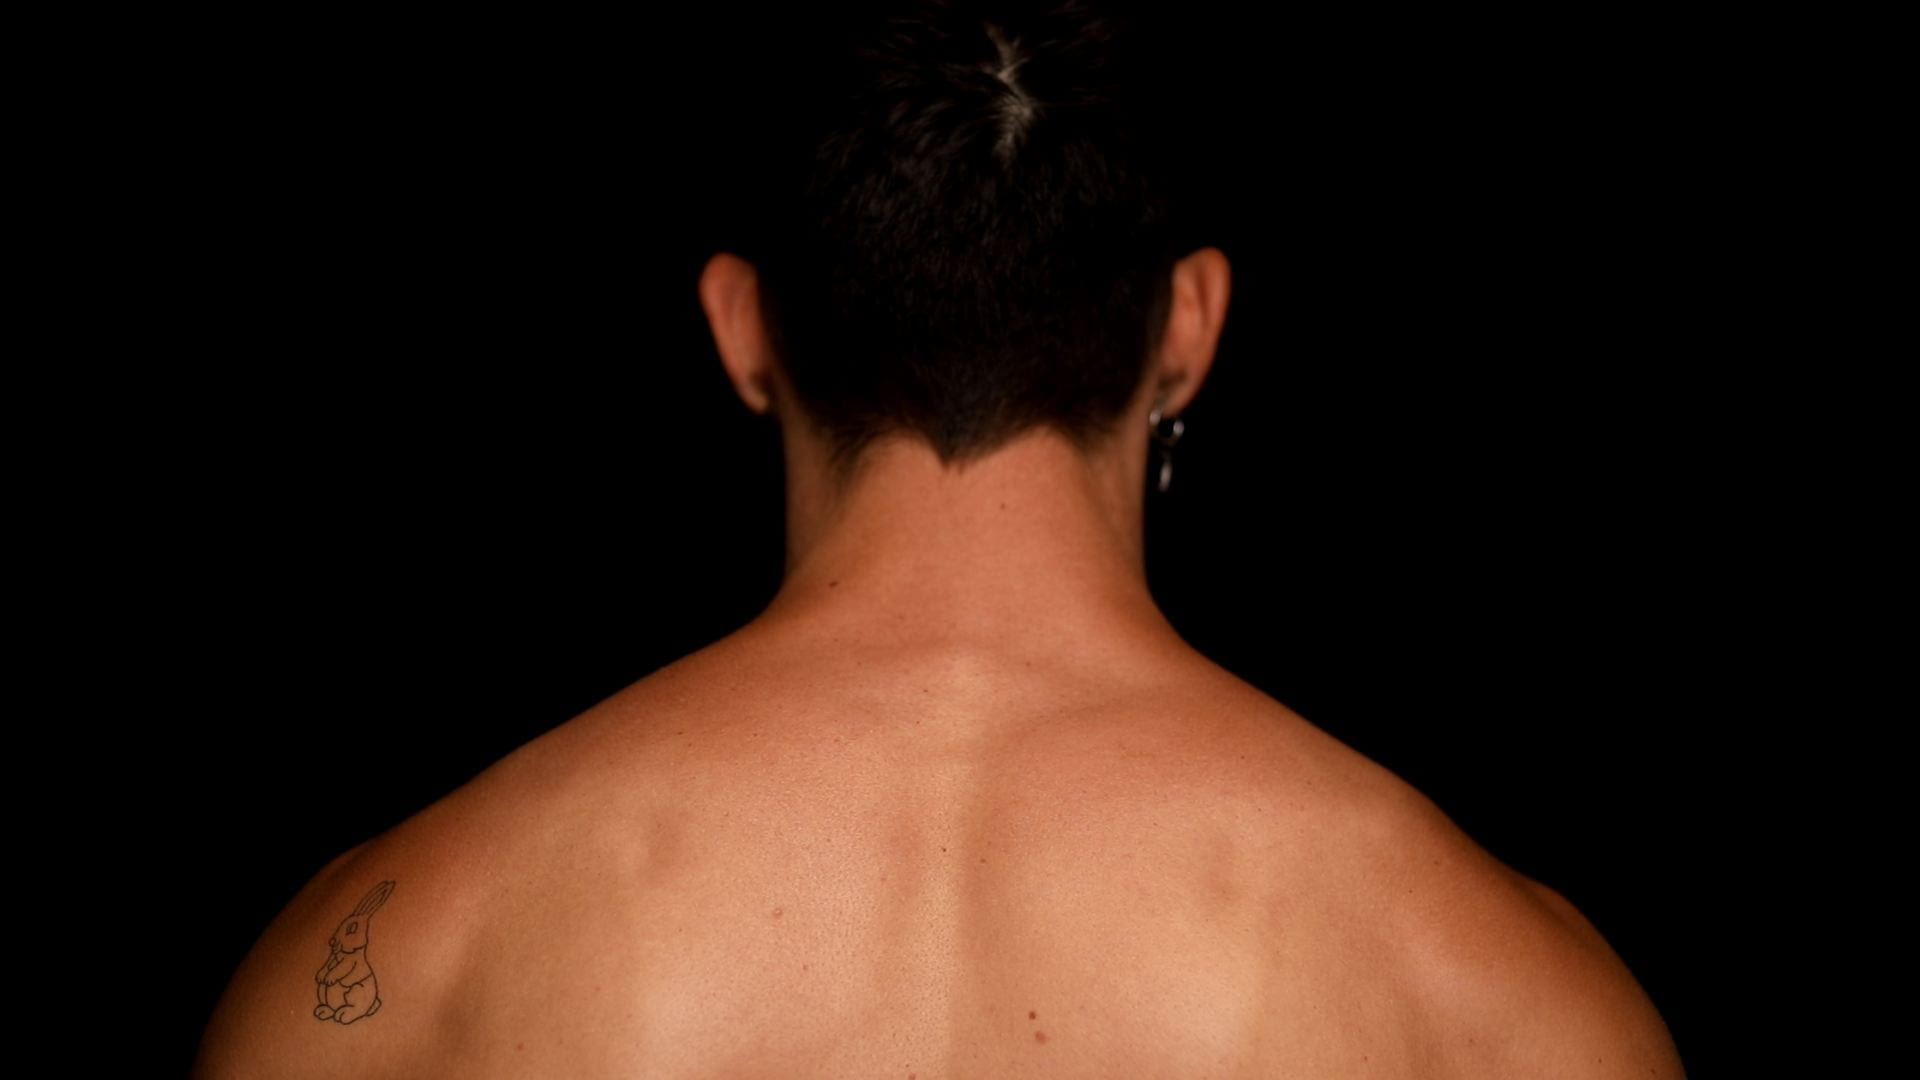 Back of a person's head with shoulder and neck showing. They have defined musculature and a tattoo of a rabbit.